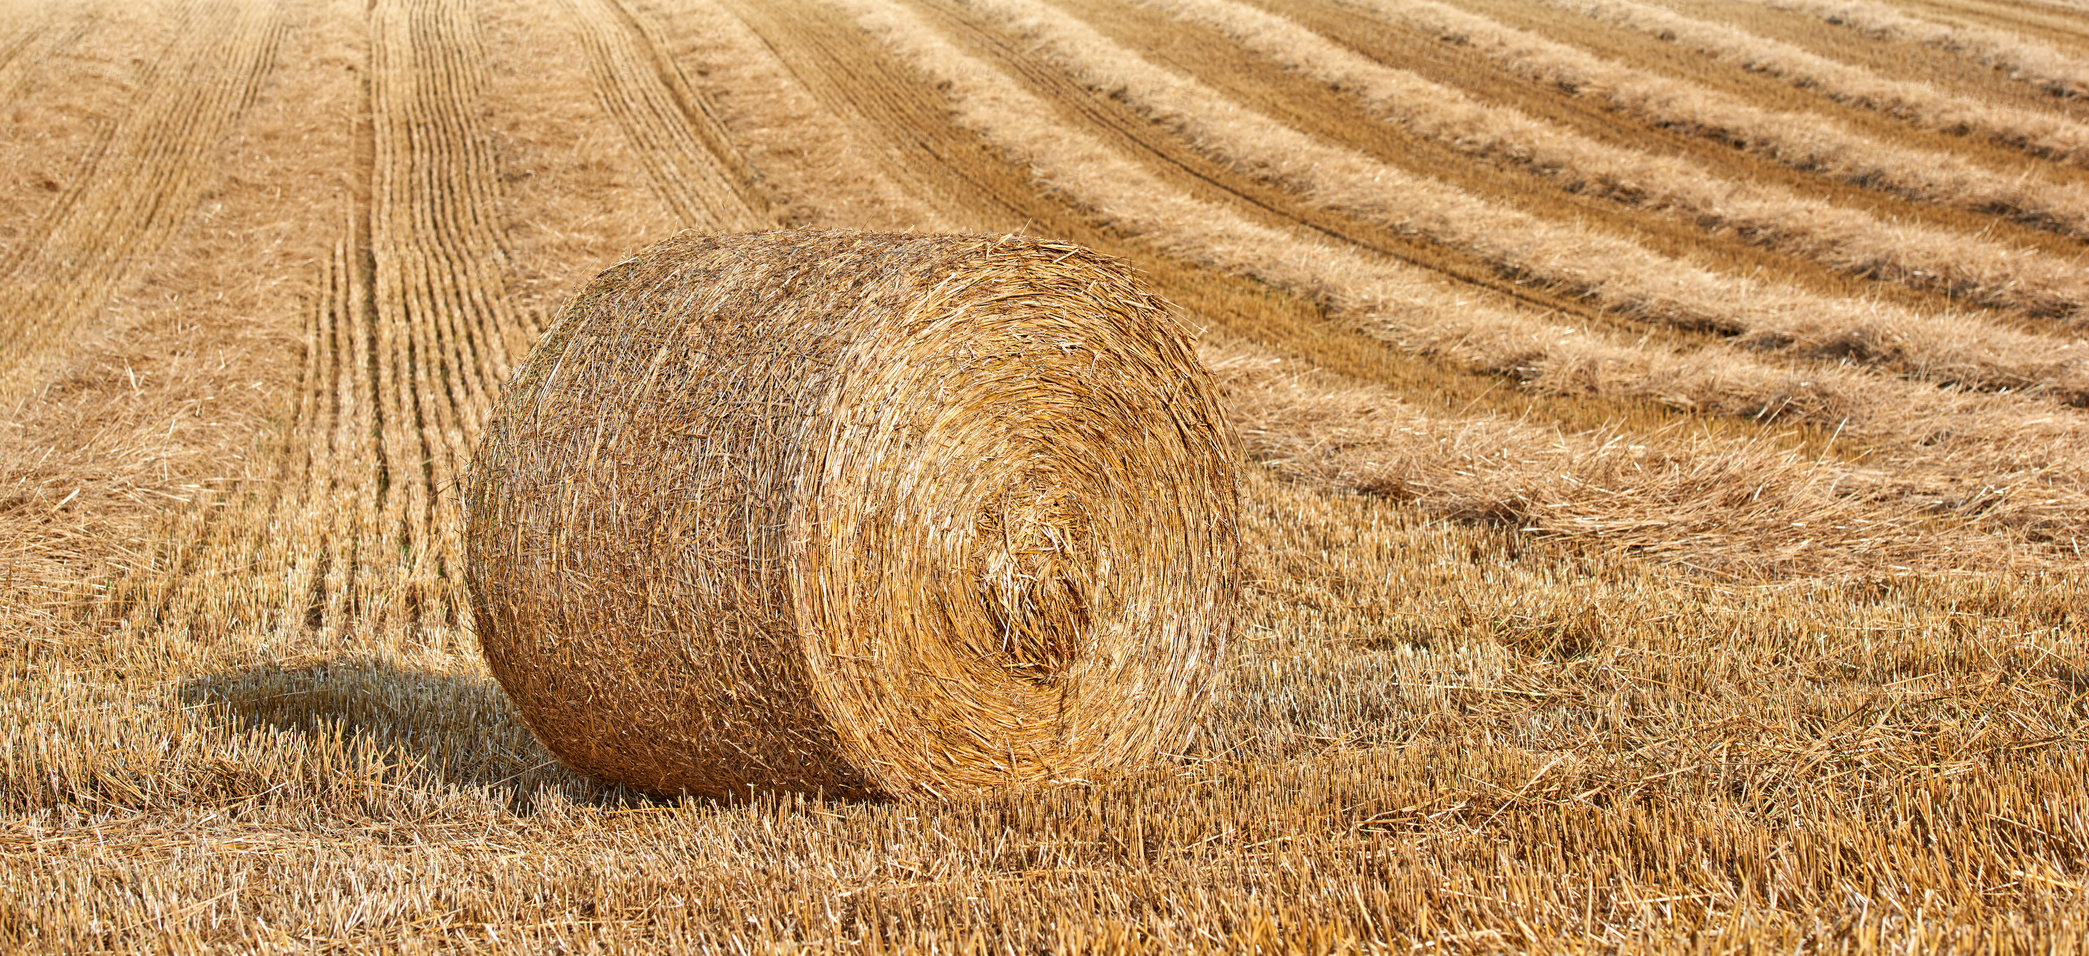 Buy stock photo Round hay bale of rolled straw on agricultural farm pasture and grain estate after harvesting wheat, rye or barley. Landscape view of a ploughed field and copy space background of a rural environment